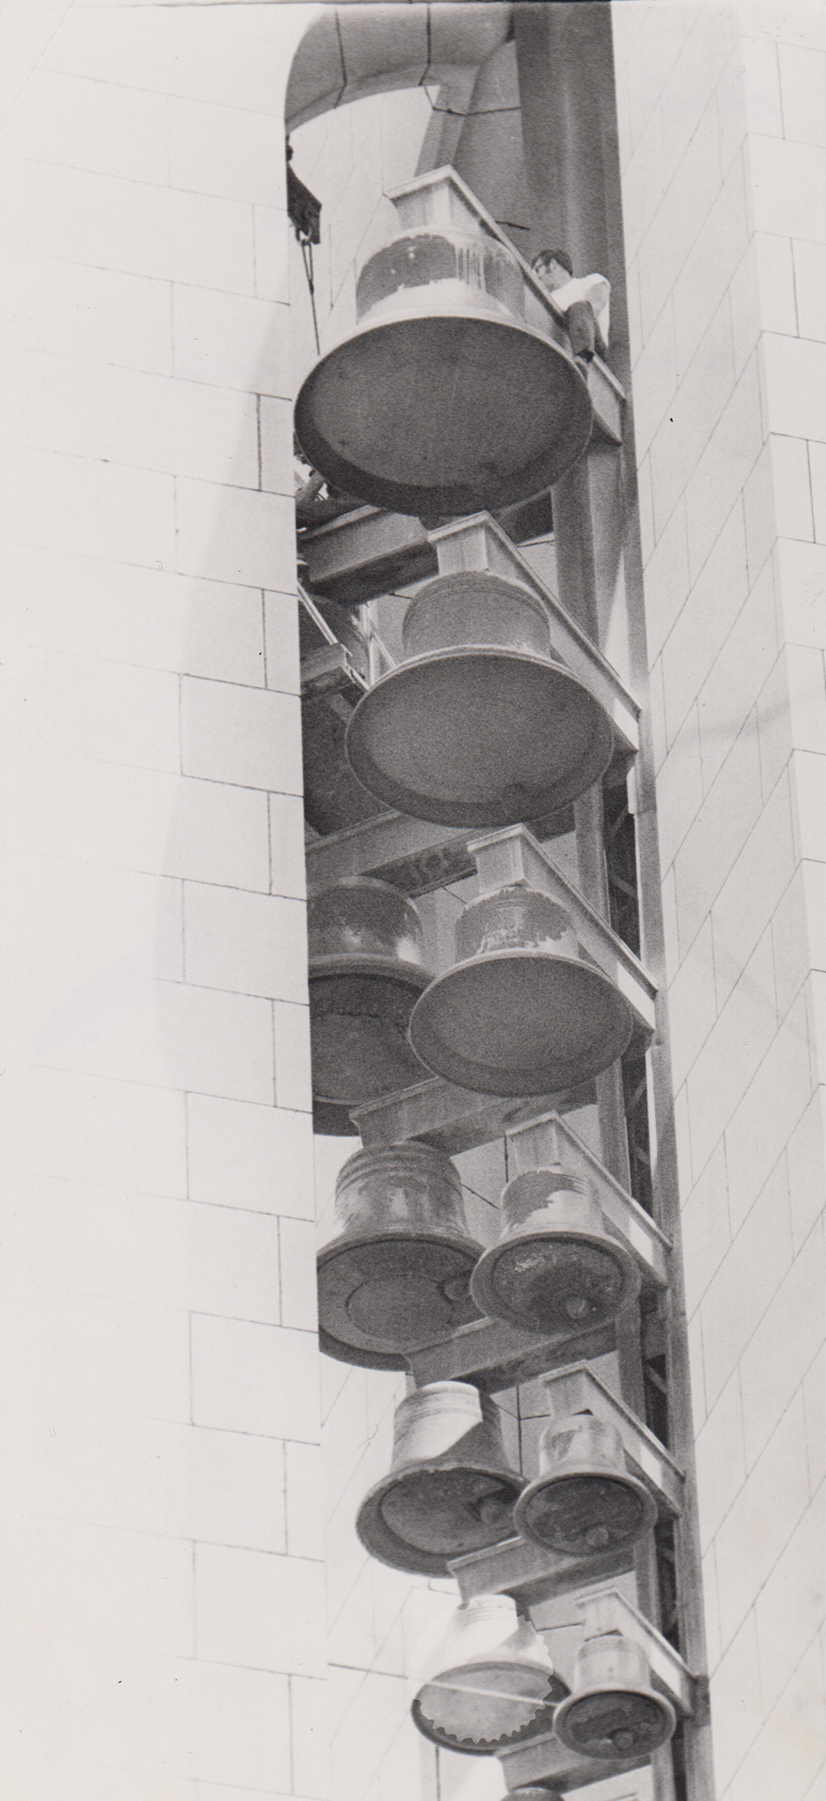 A worker atop the bells, June 1973